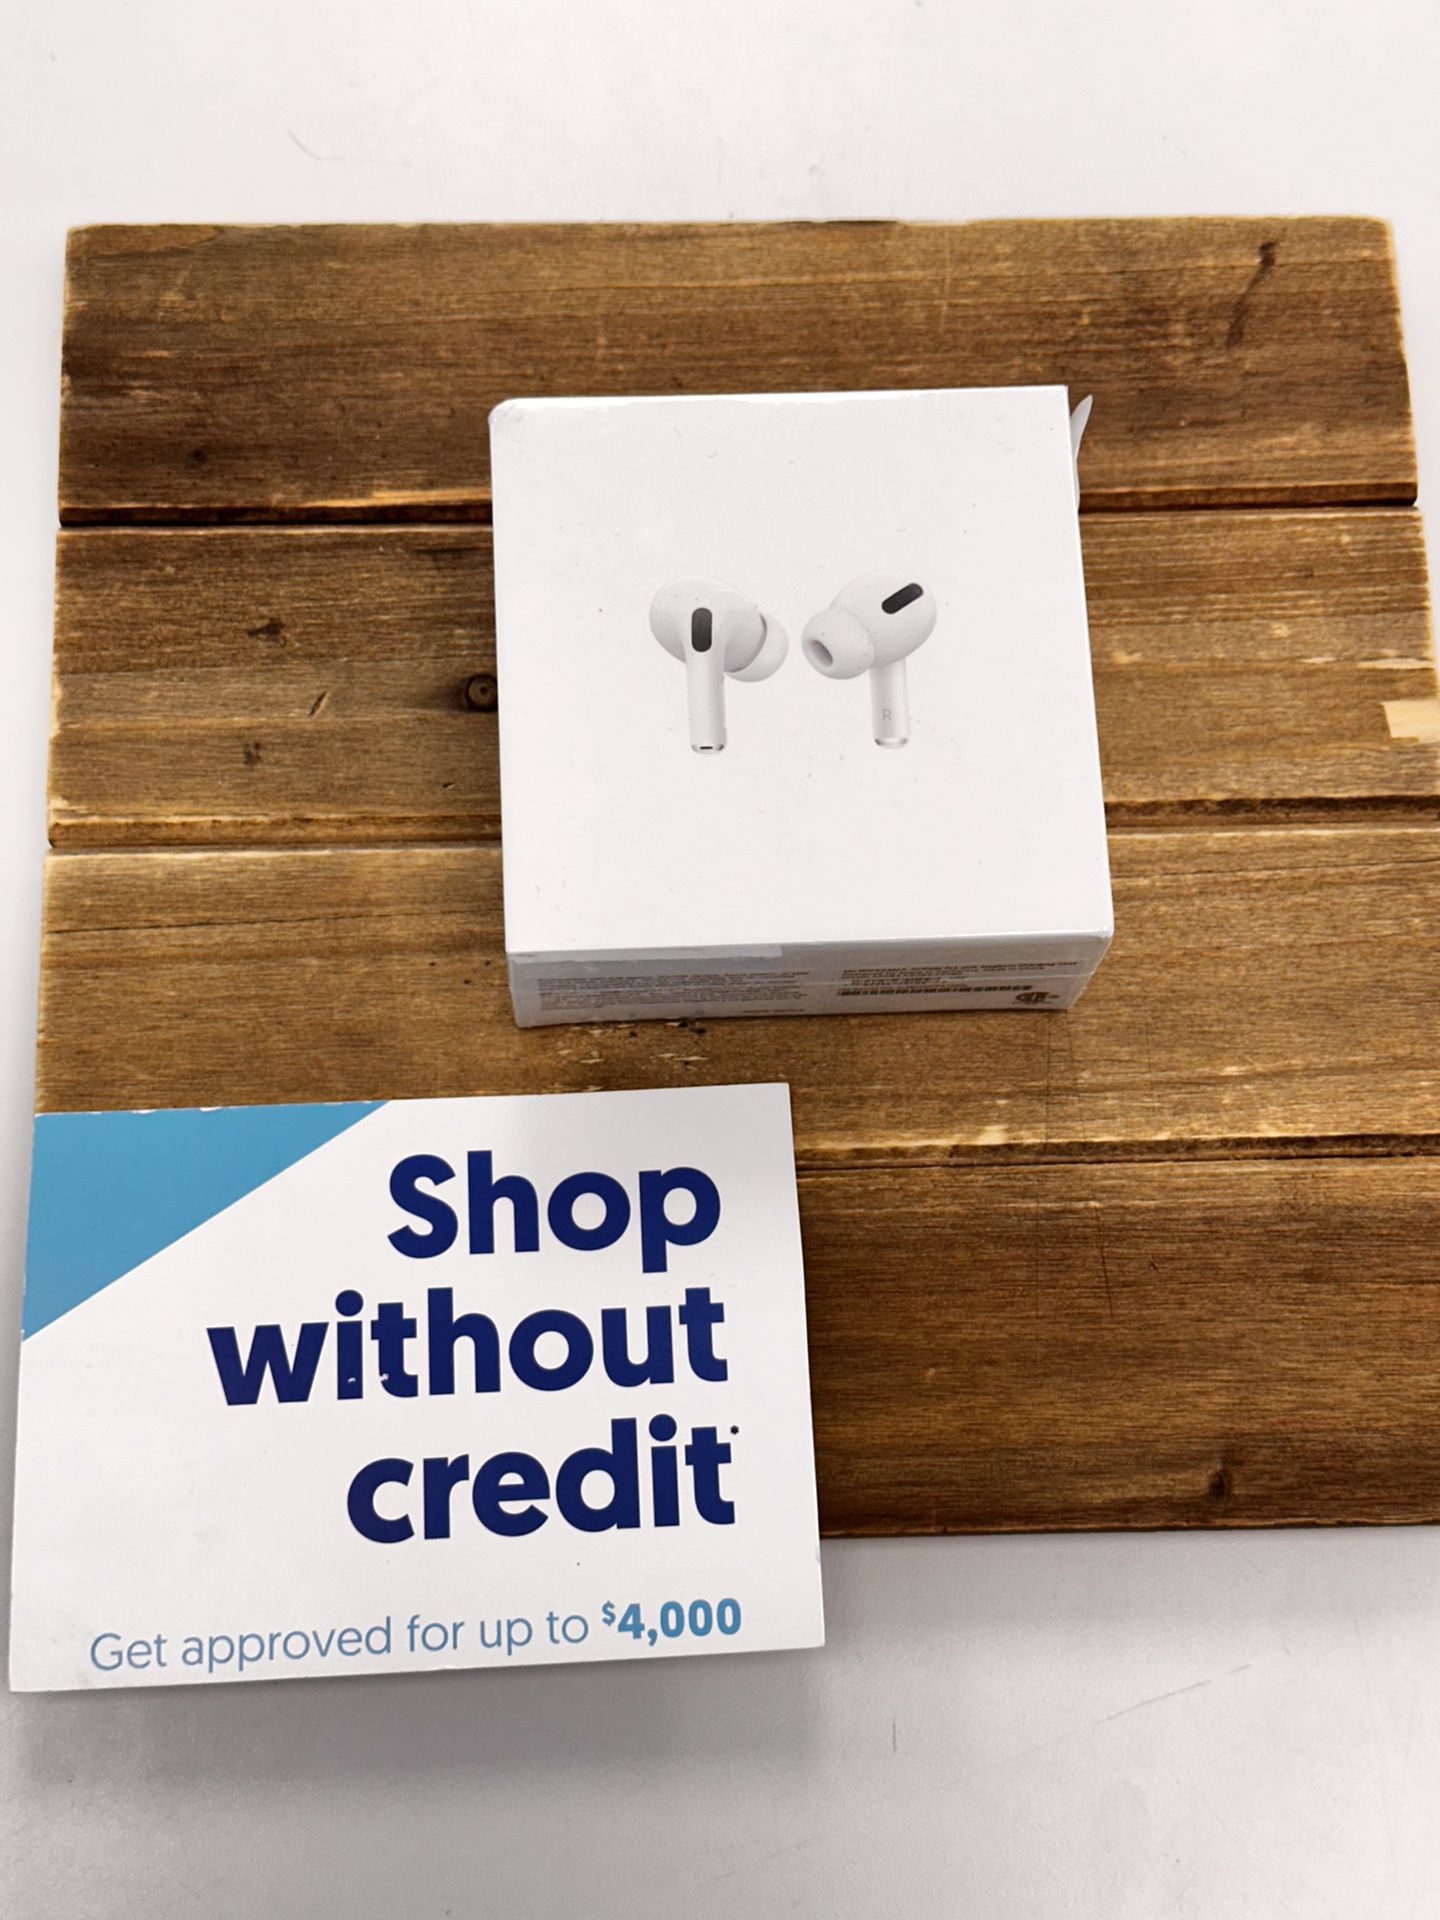 Apple Airpods Pro Bluetooth Earbuds - Pay $1 Today to Take it Home and Pay the Rest Later!